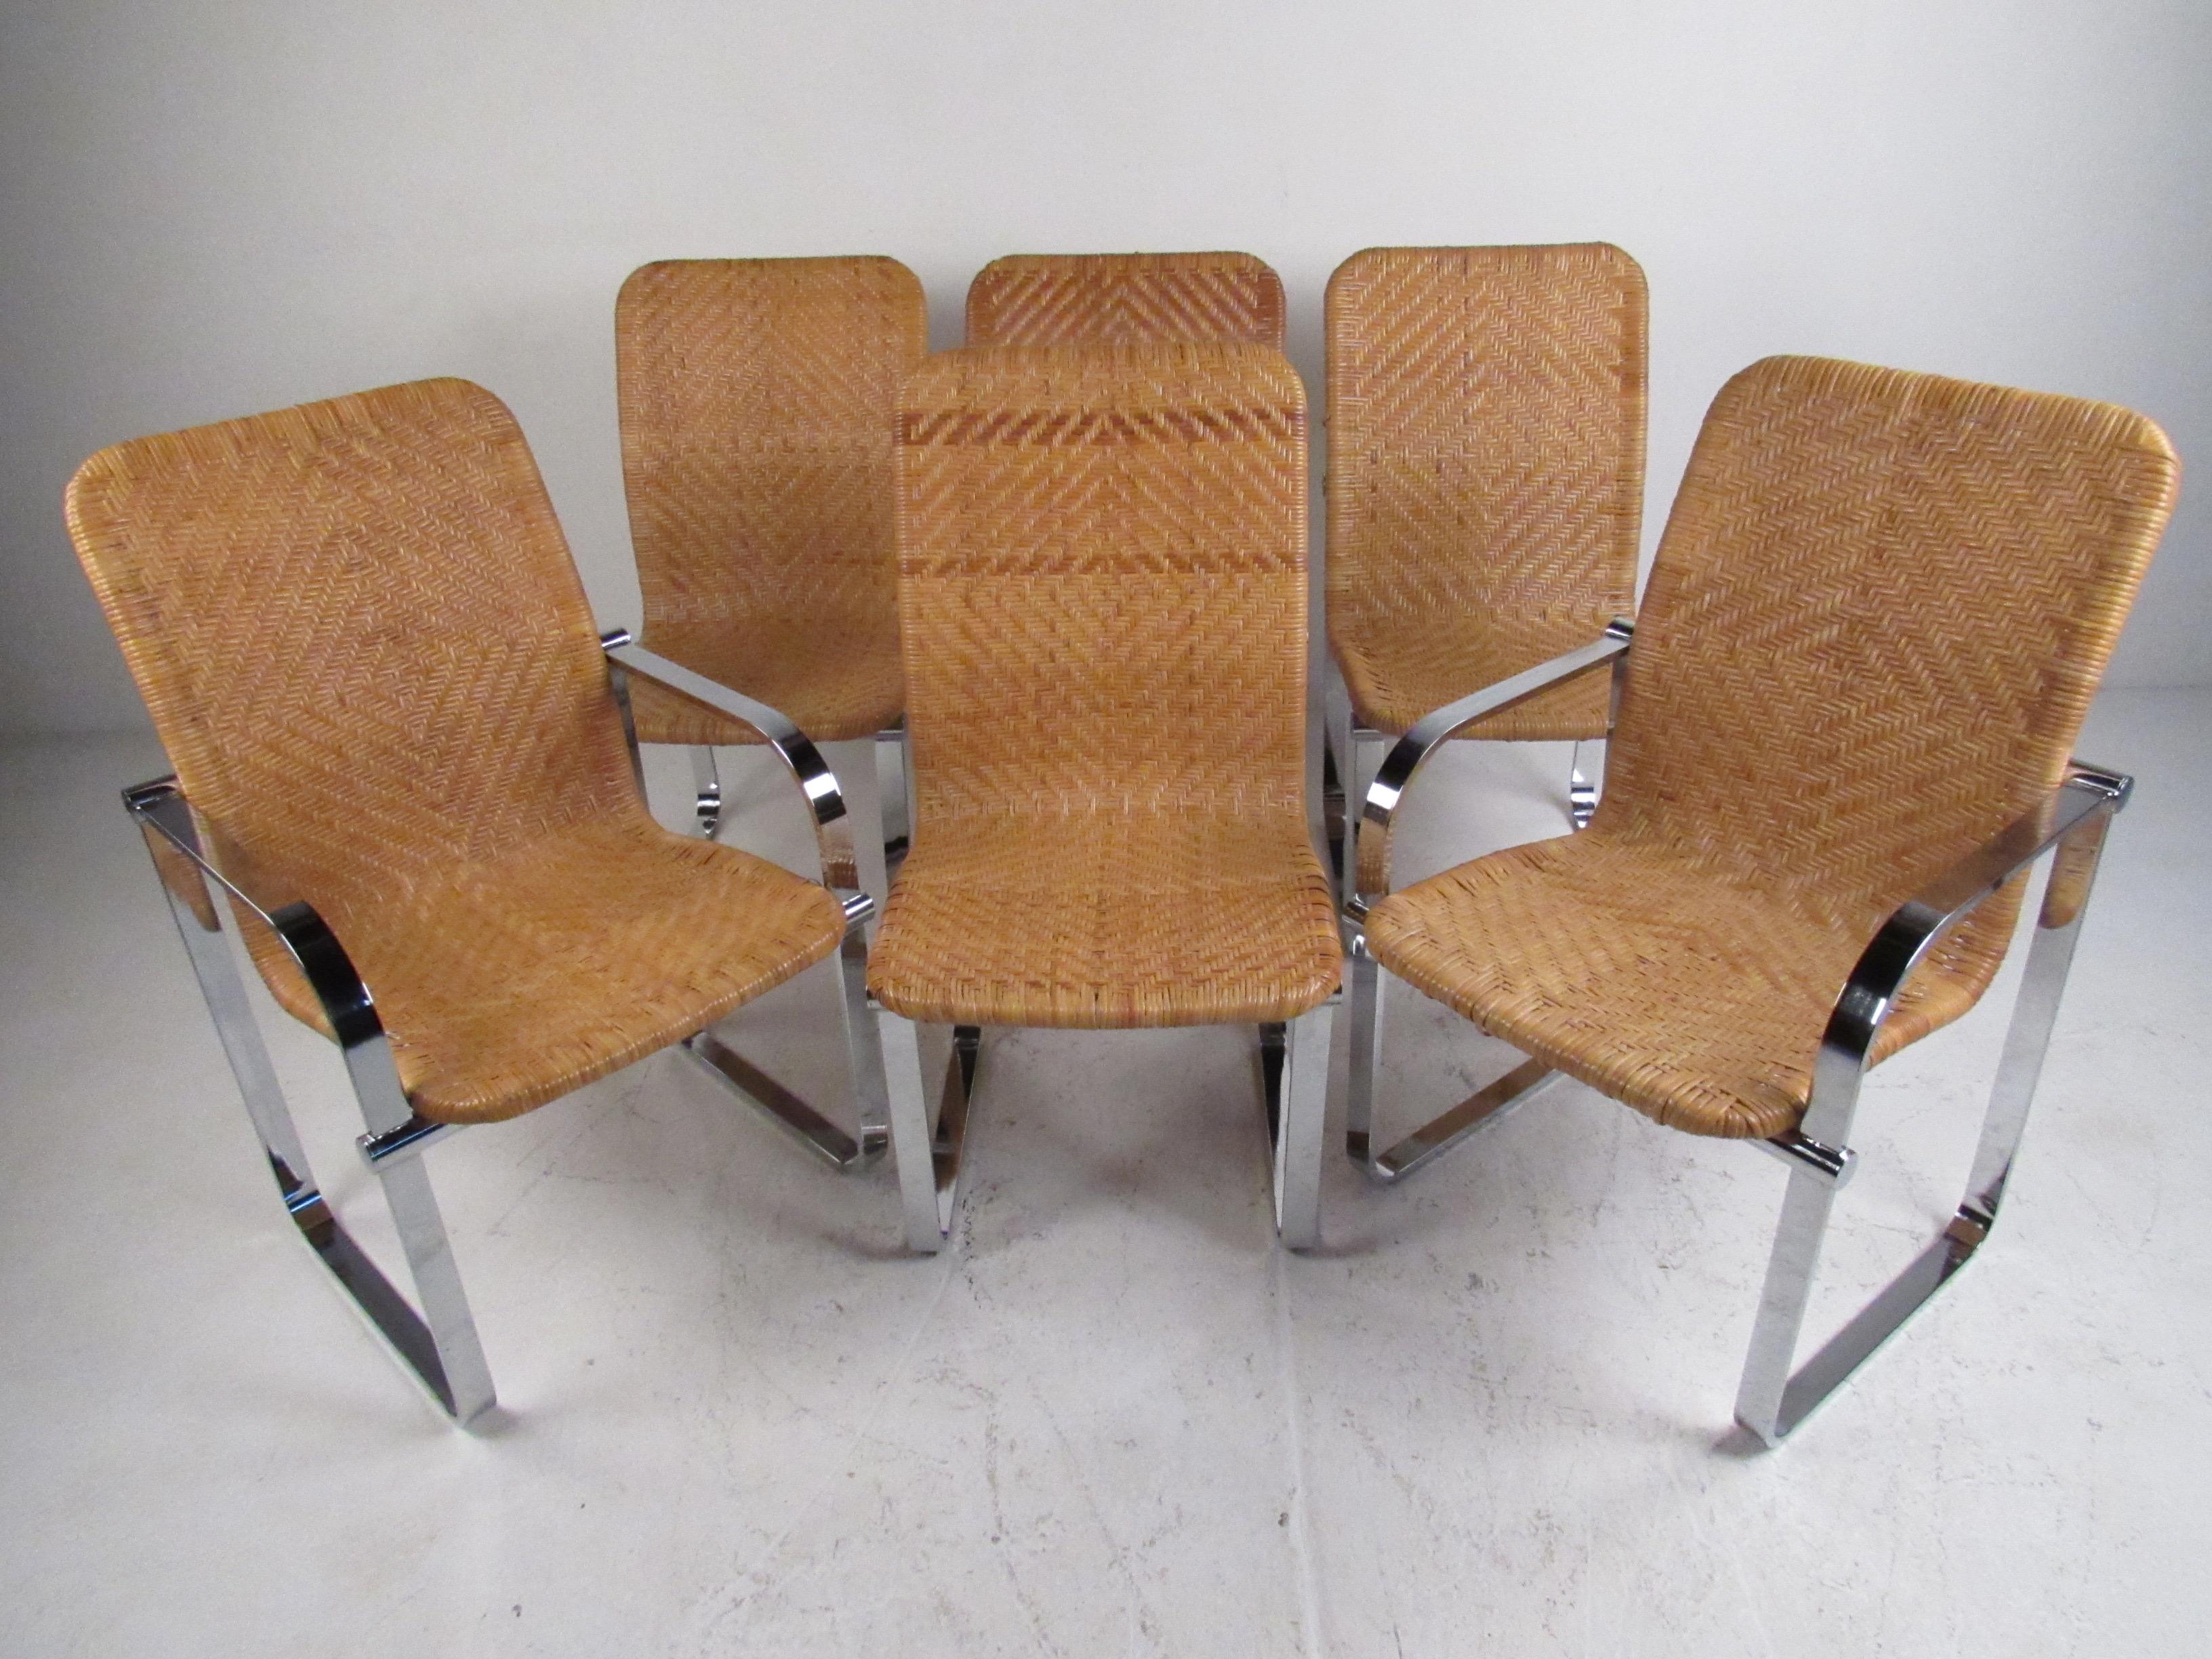 Six rattan & chrome dining chairs these stylish chairs will be a great accommodation to your dining room.
Features chrome frame with rattan woven seats.